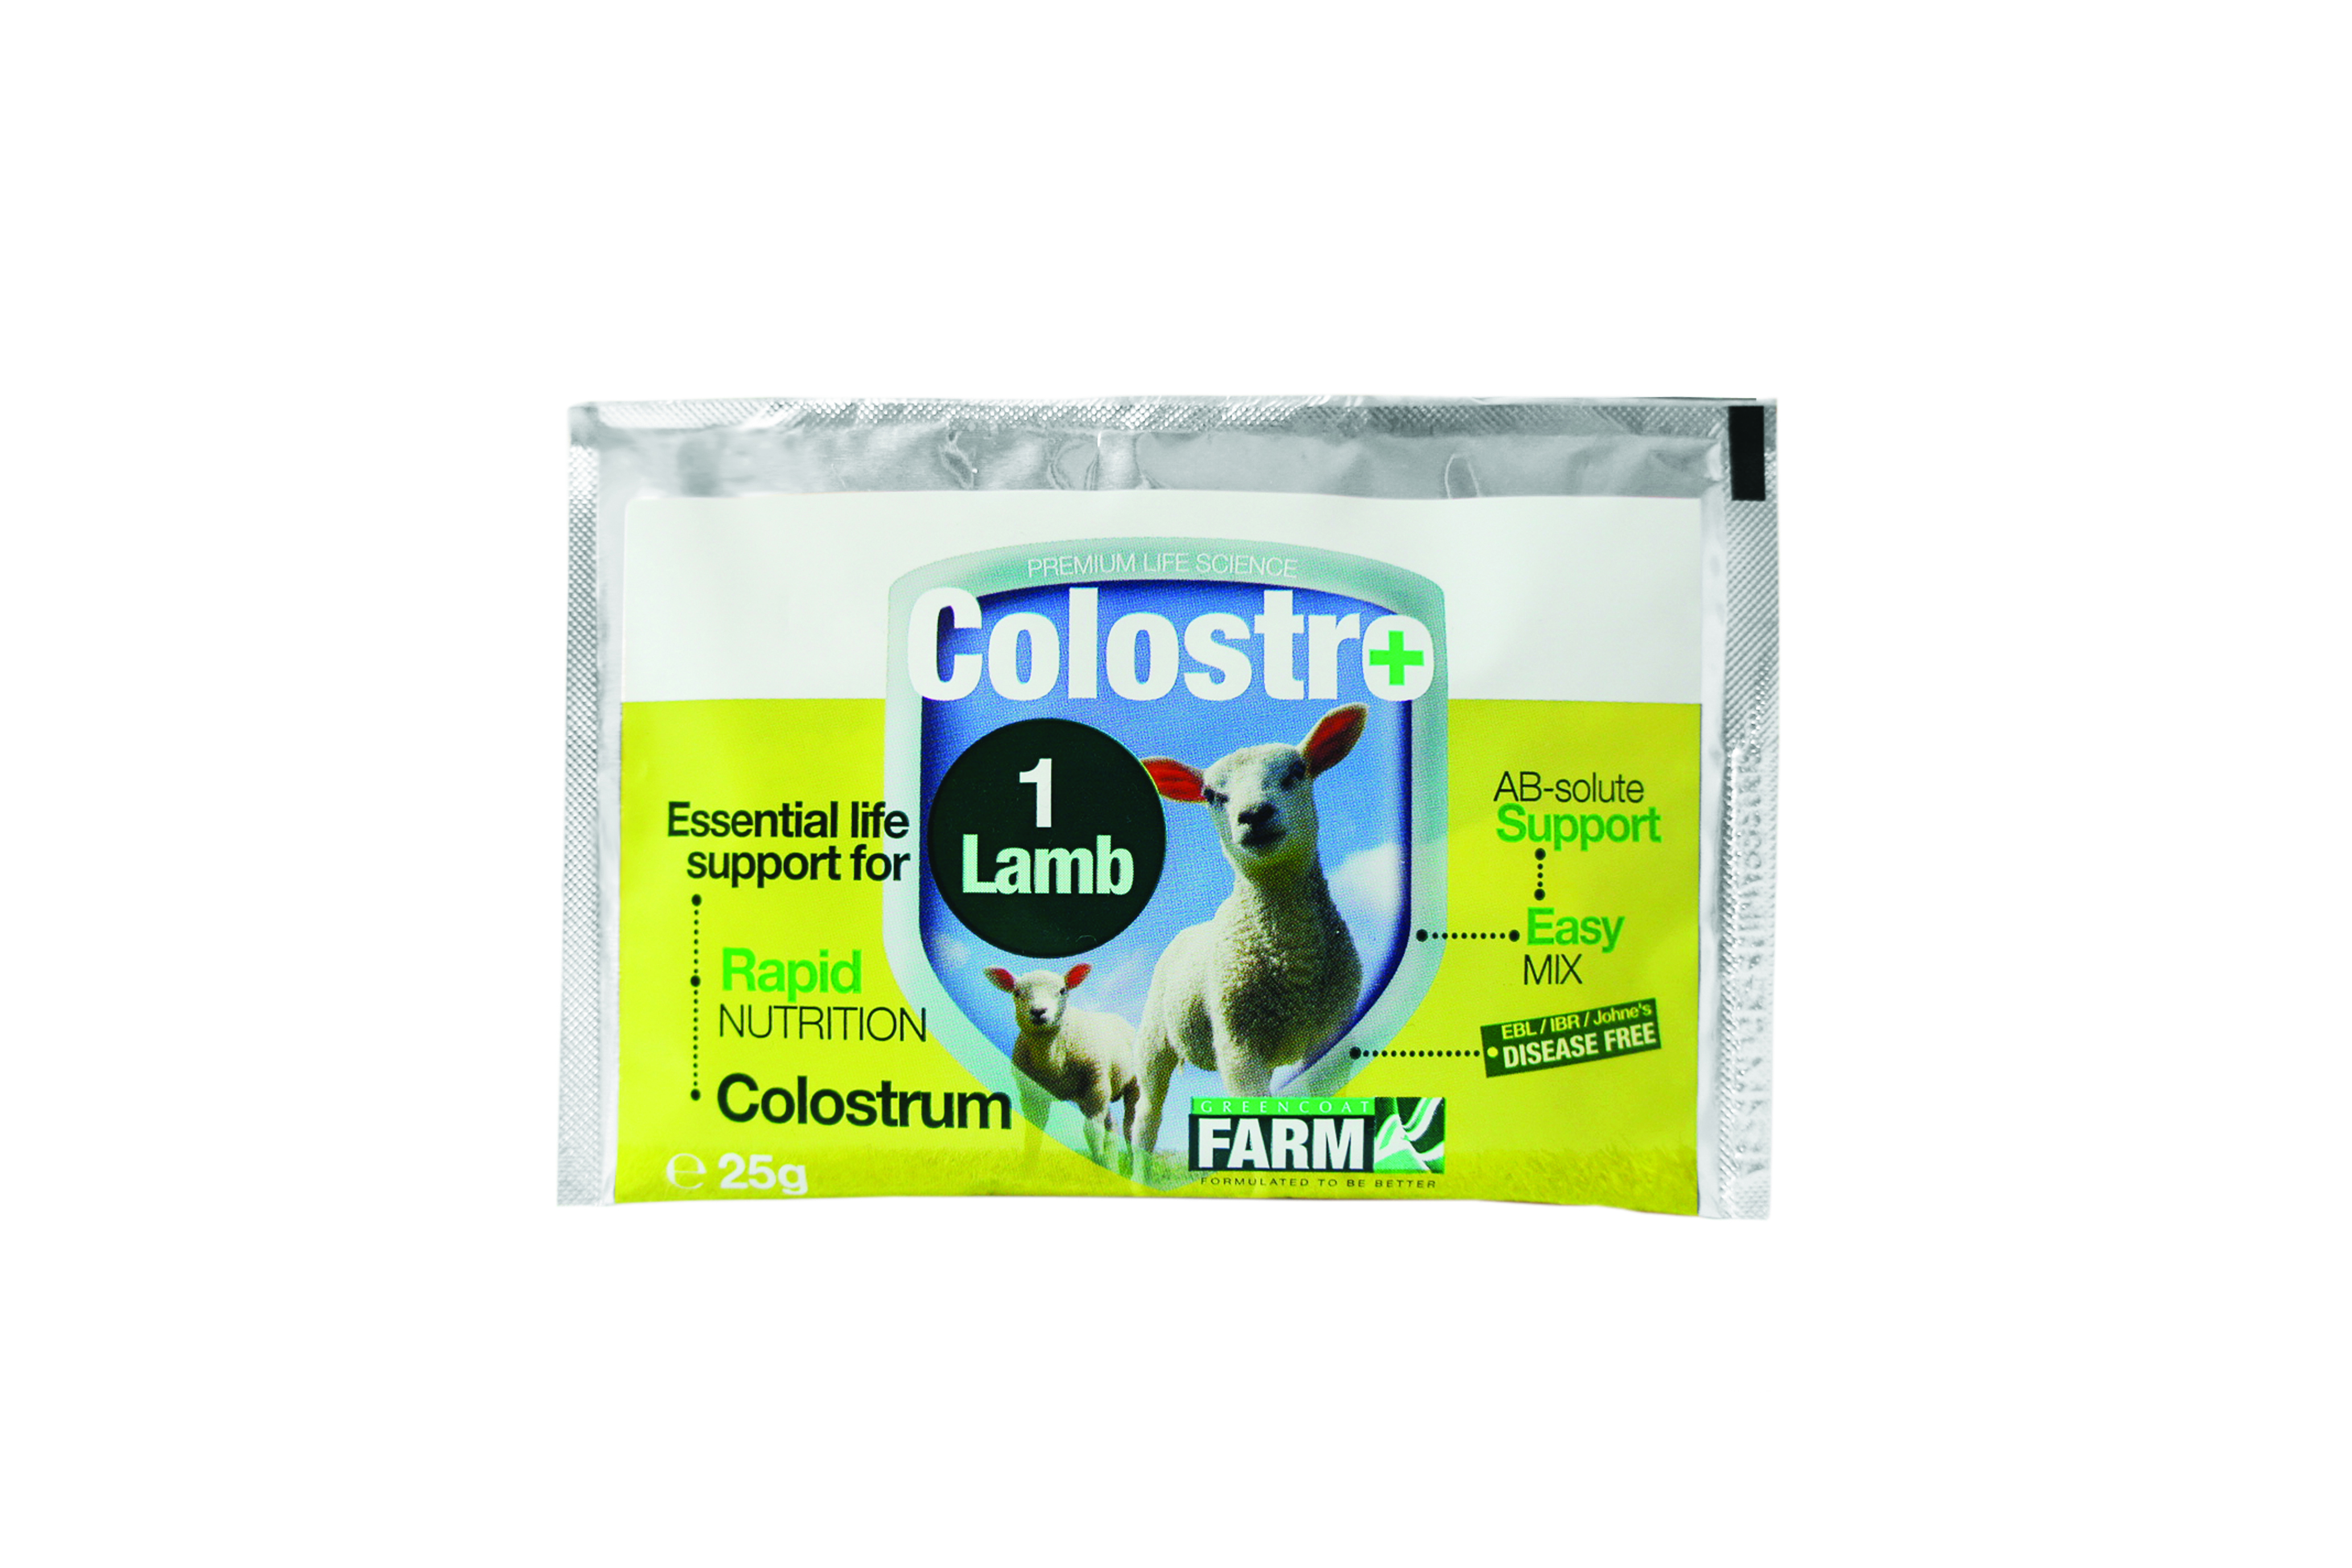 Lamb Colostro+ - Naturally derived, high quality colostrum for newborn lambs with Colostro+ Shield, prebiotics and egg proteins for rapid nutritional support, immunity and energy